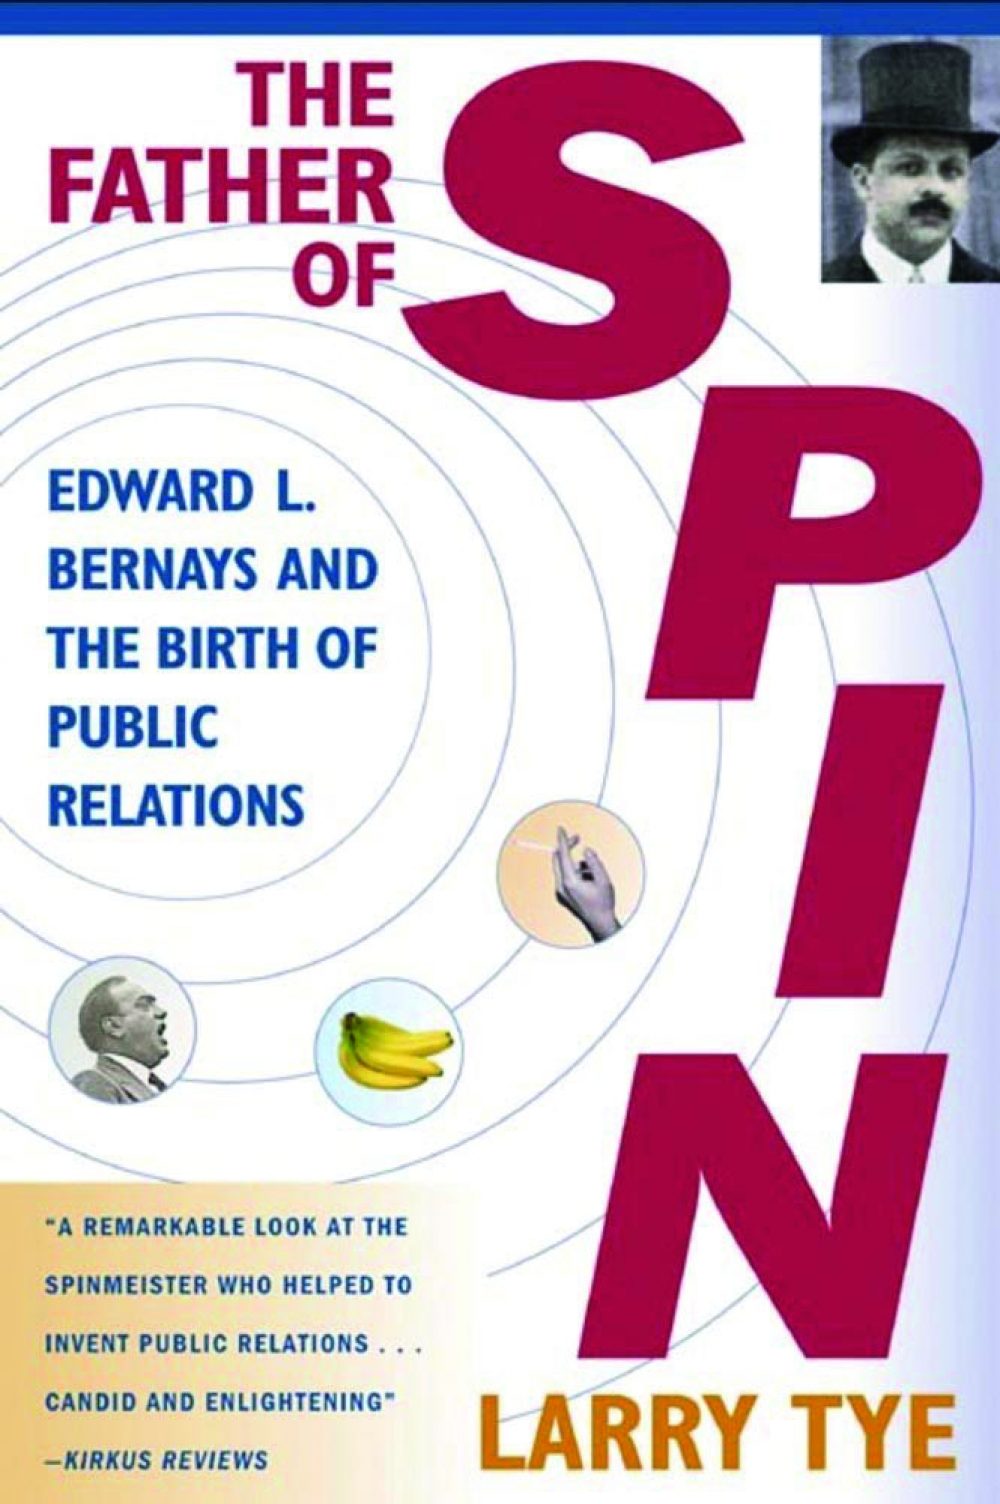 The Father of Spin by Larry Tye